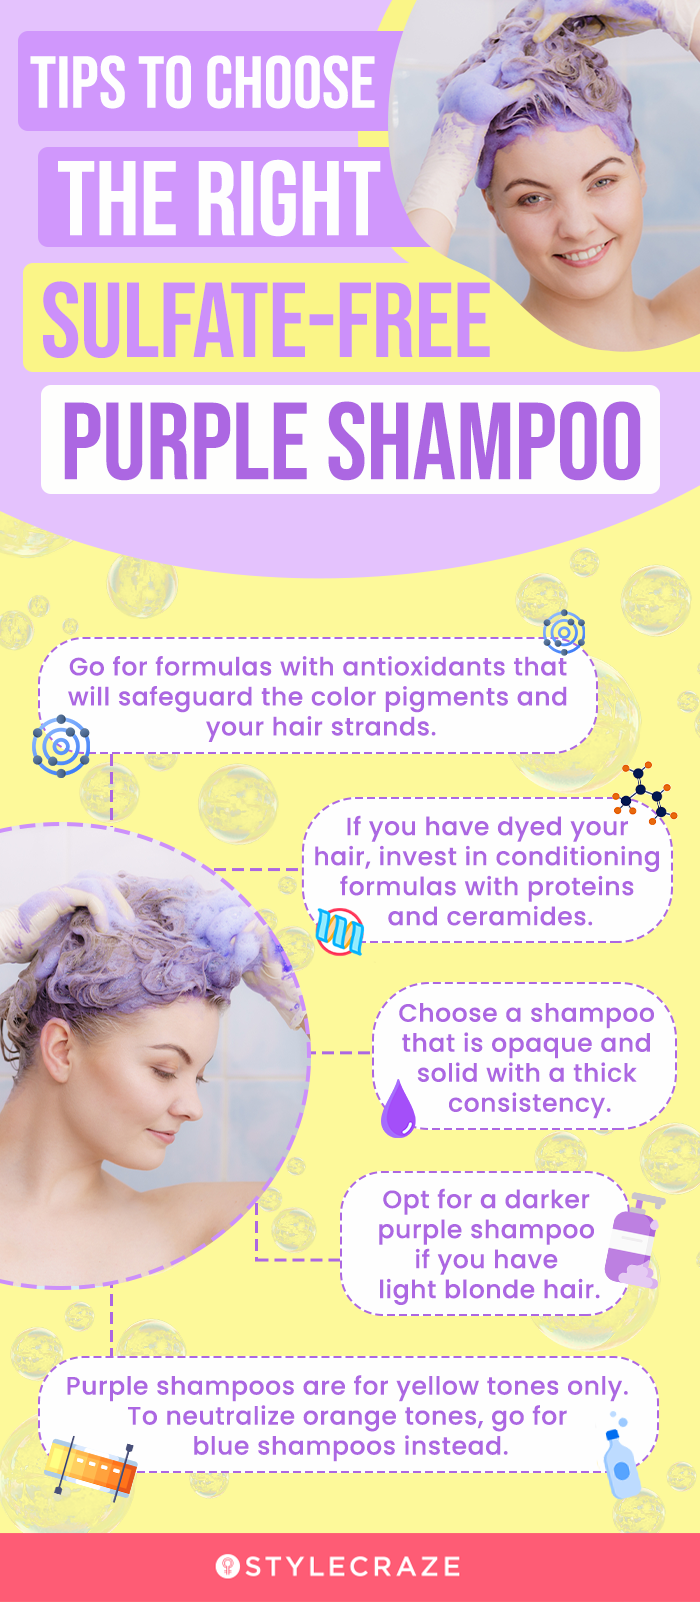 Tips To Choose The Right Sulfate-Free Purple Shampoo